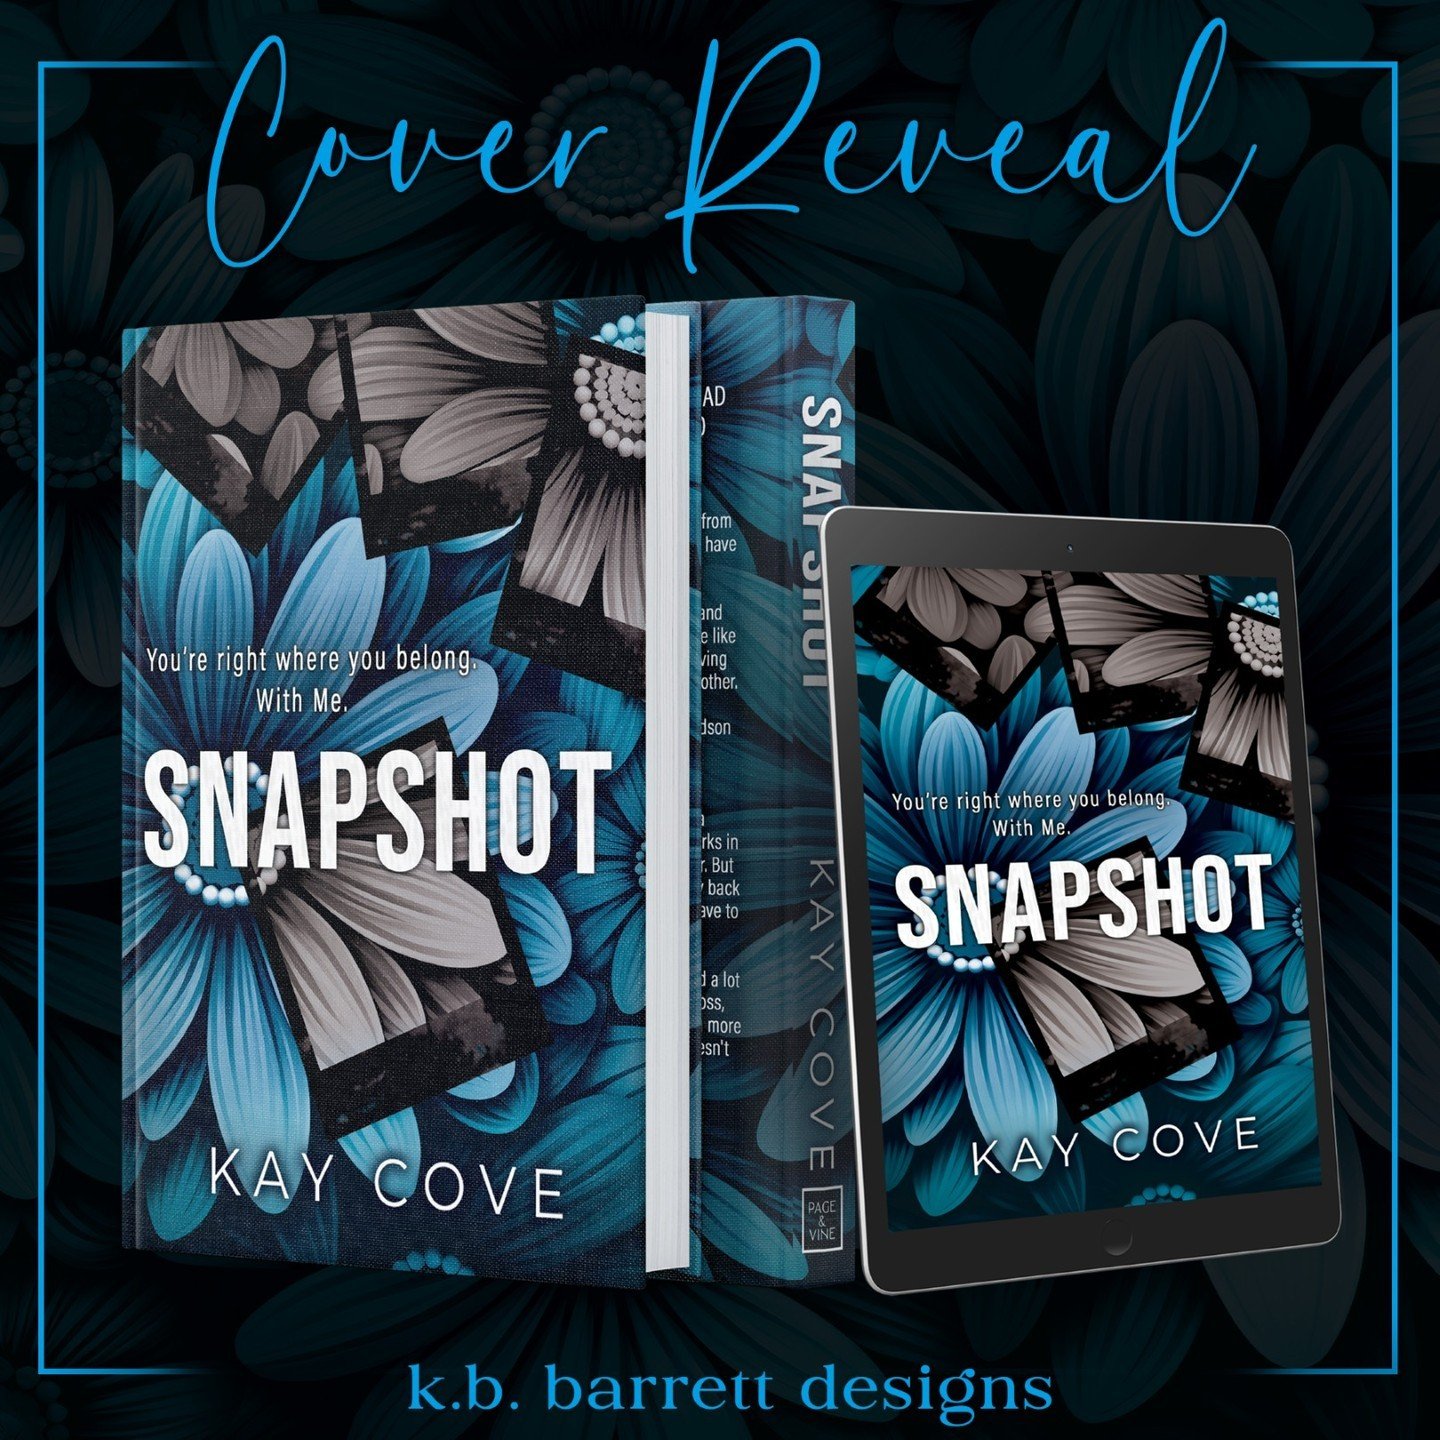 I was Scrolling on my IG this morning and realized that I hadn't posted this!!! I can not believe I didn't! 
So Happy (A little late) Cover reveal to my girl @authorkaycove!!